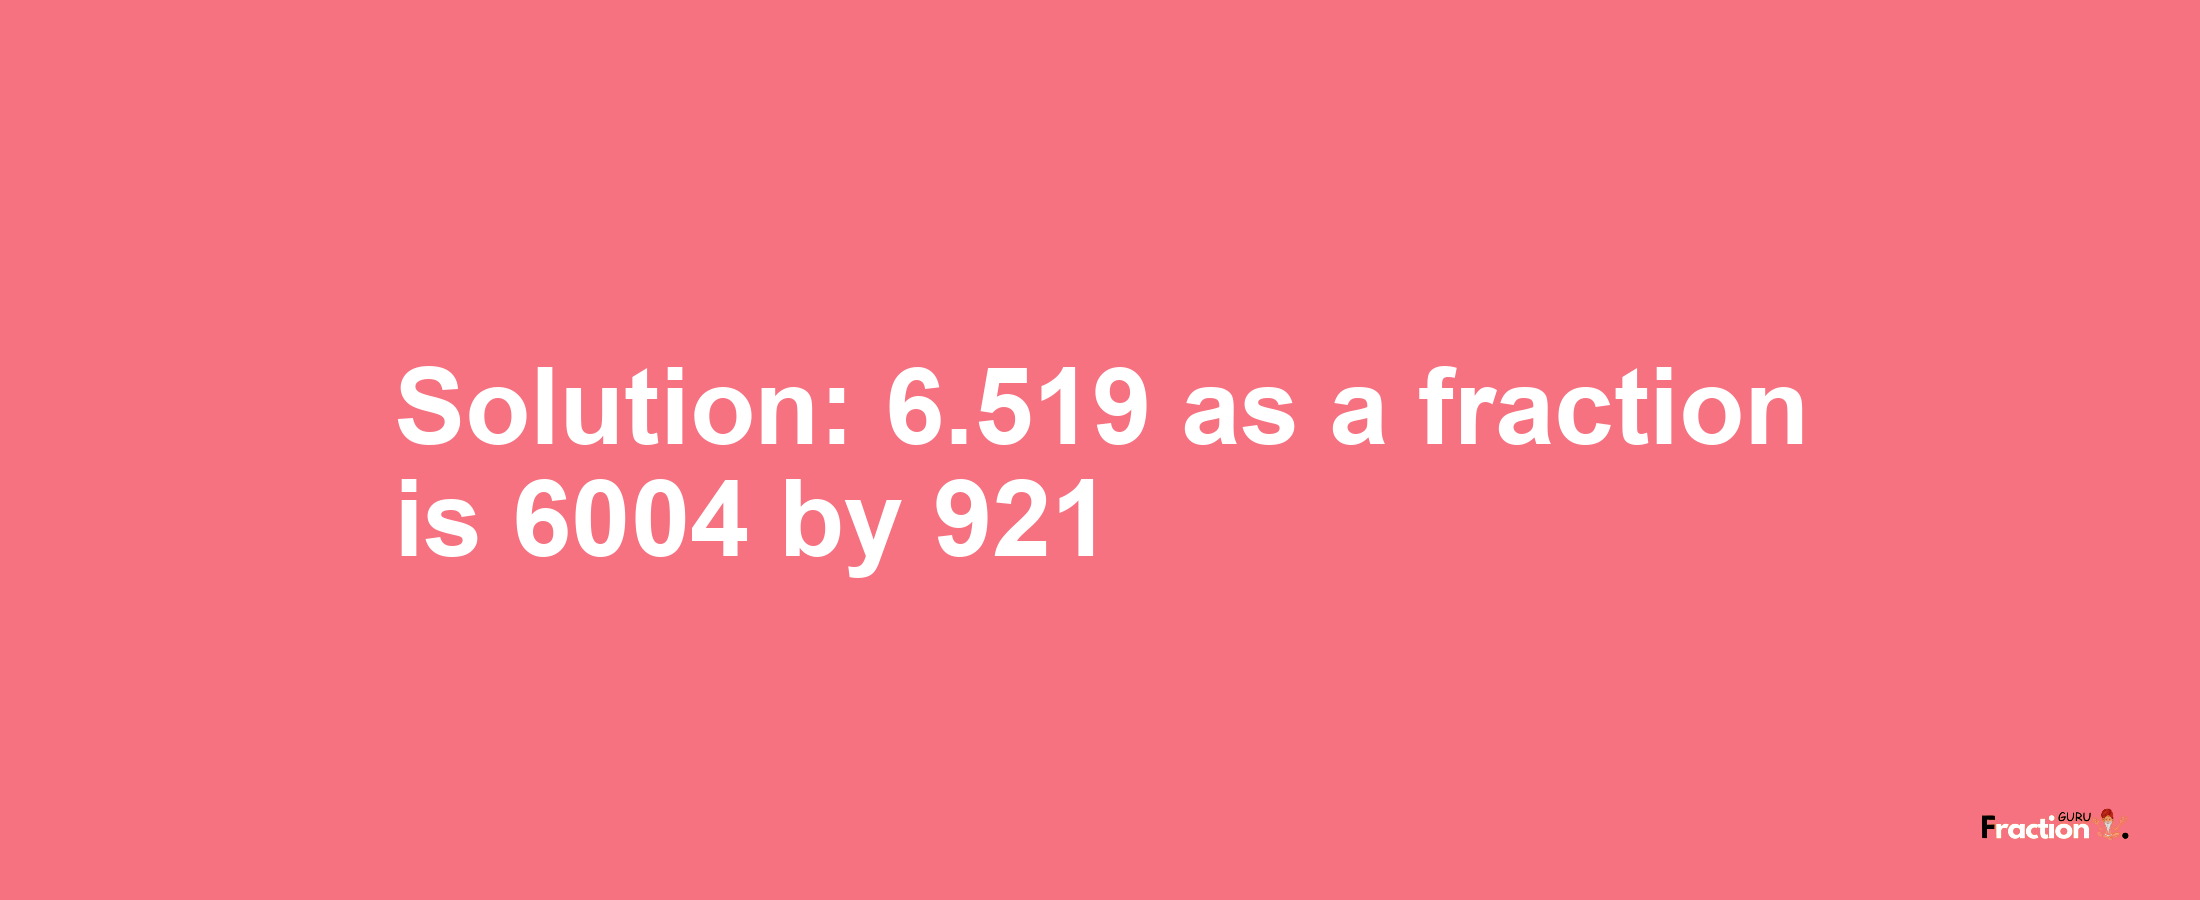 Solution:6.519 as a fraction is 6004/921